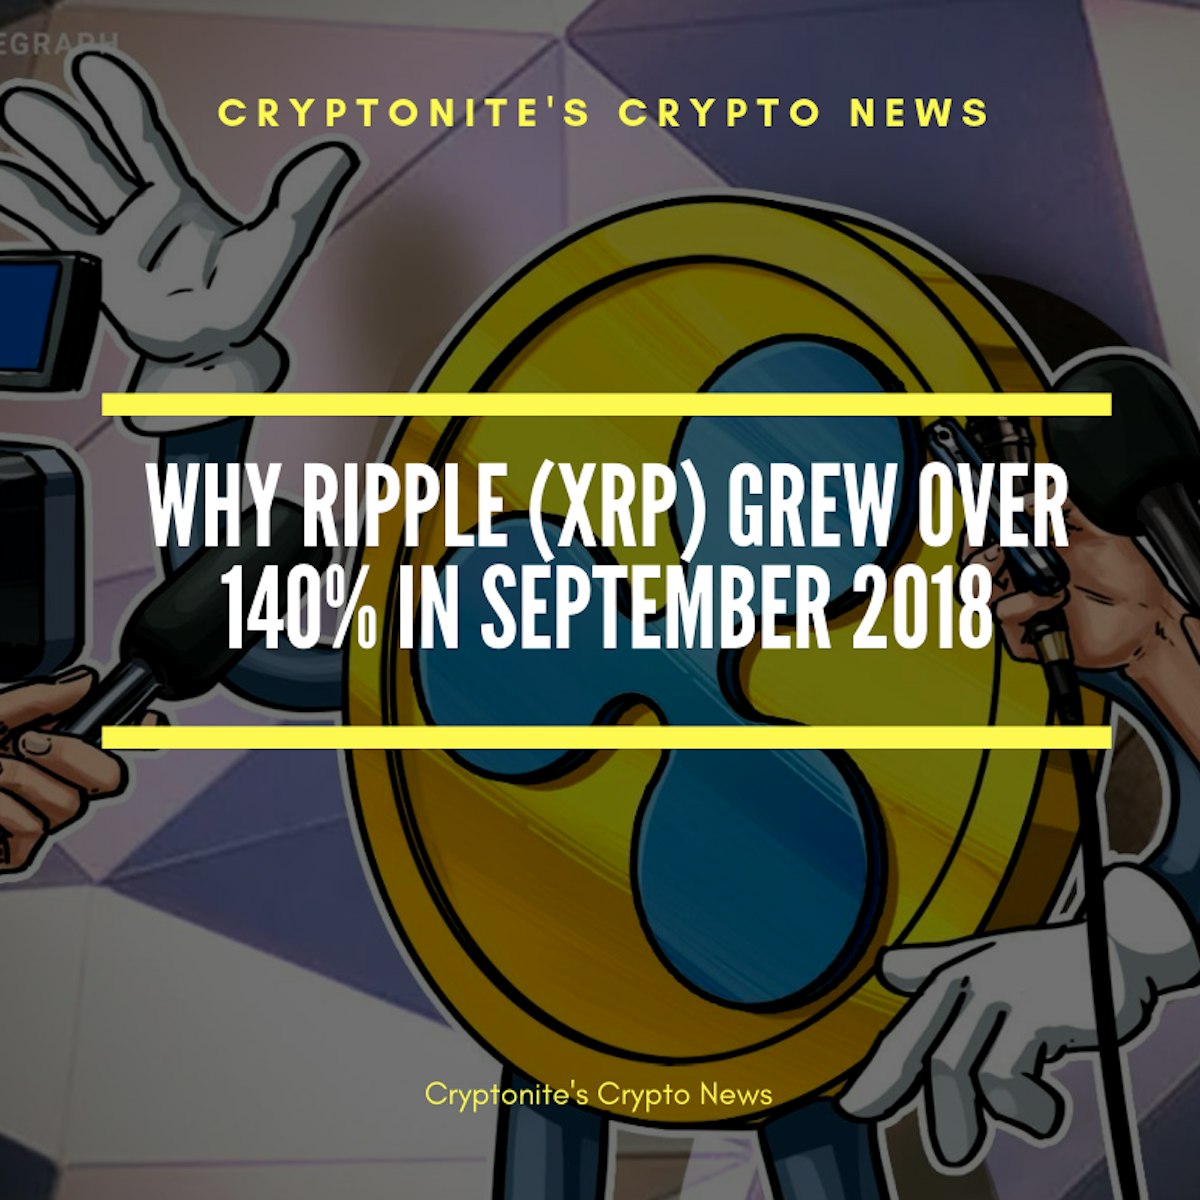 featured image - Why Ripple (XRP) grew over 140% in September 2018